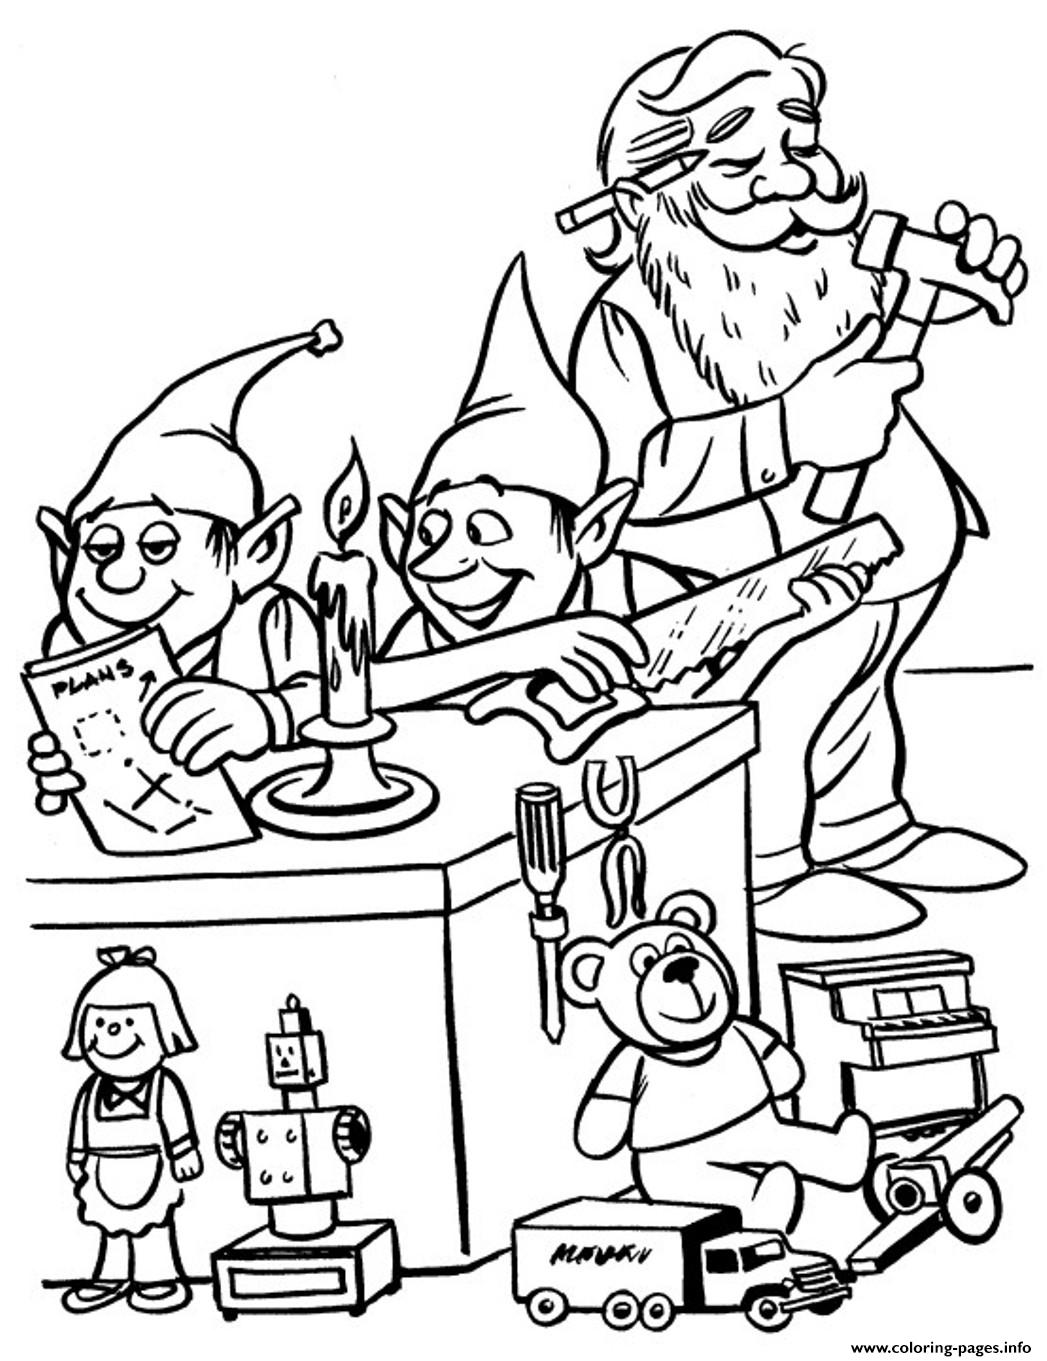 Elves And Santa Christmas S For Kids4a74 coloring